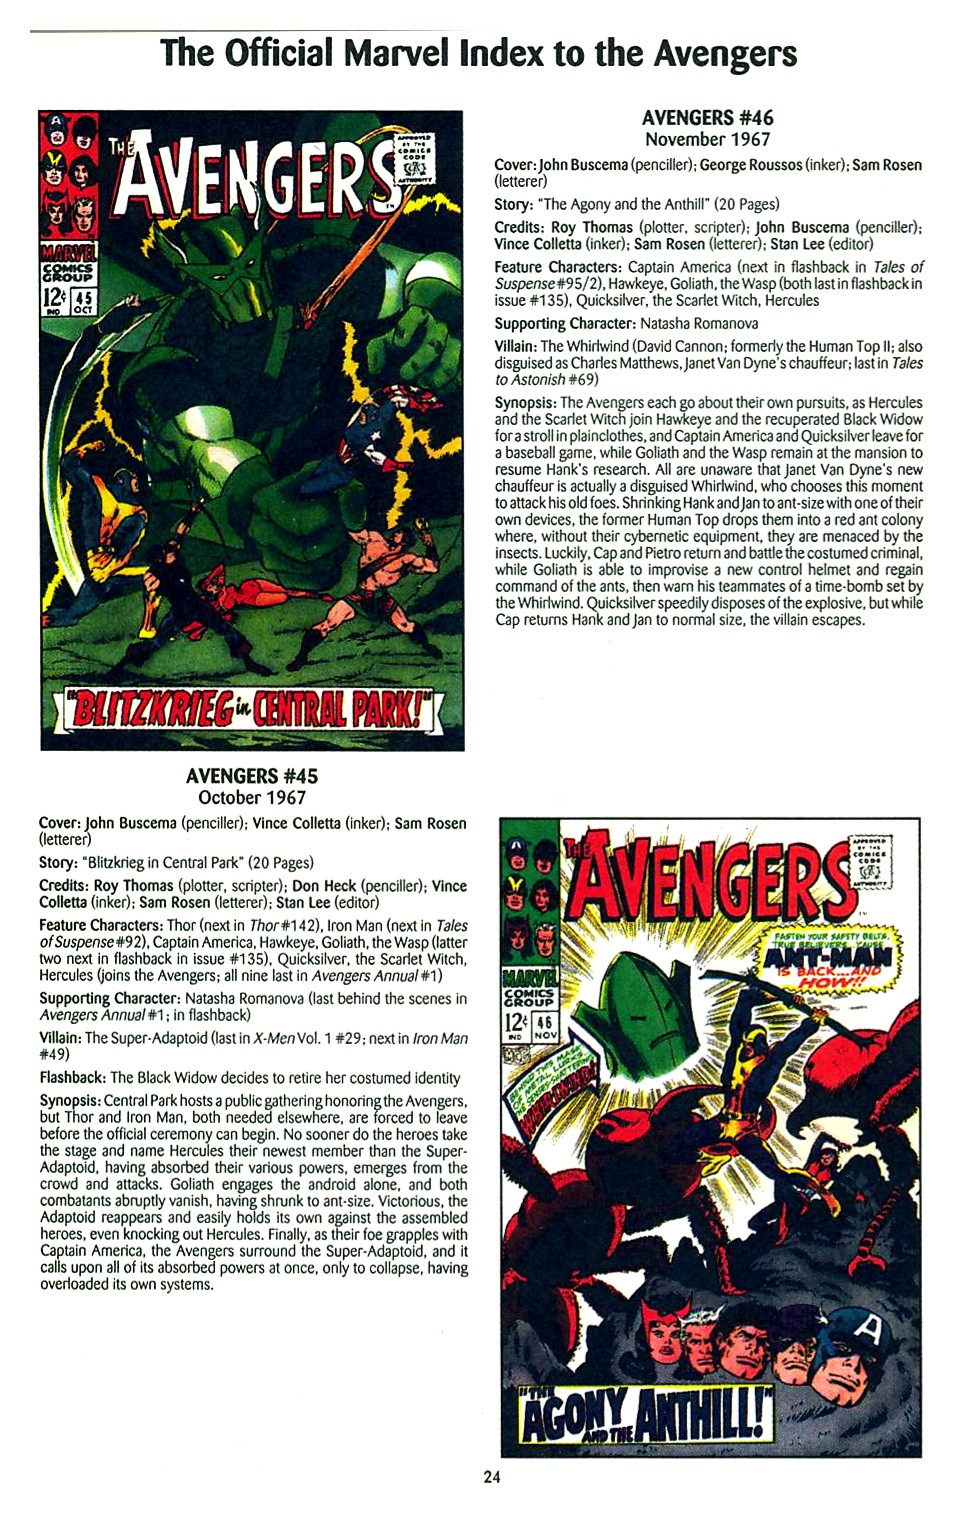 Read online The Official Marvel Index to the Avengers comic -  Issue #1 - 26